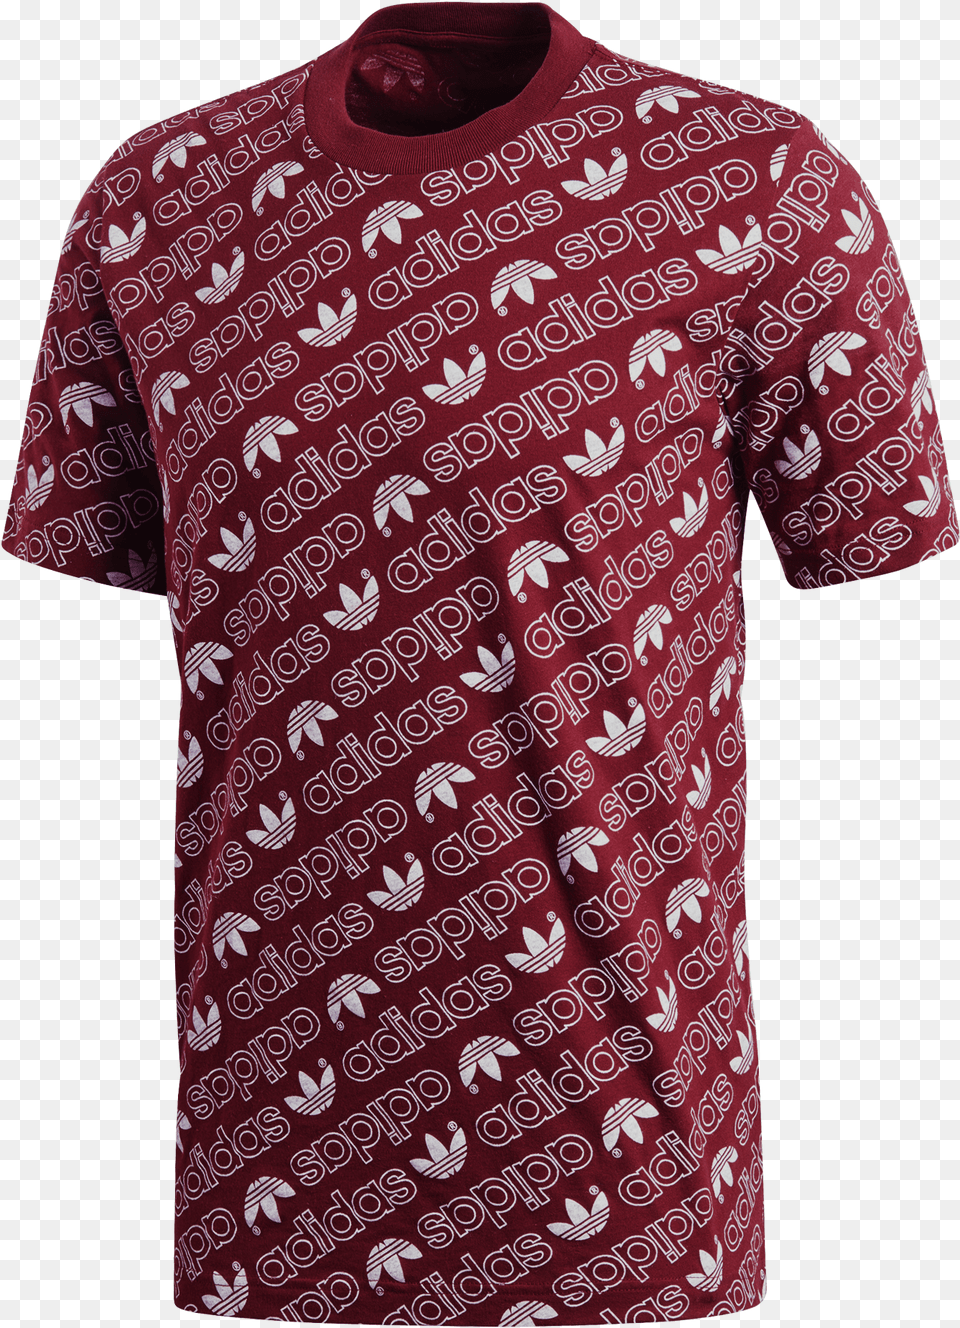 App Photo Front Dh2747 App On Model Pattern, Clothing, Shirt, T-shirt, Maroon Free Transparent Png